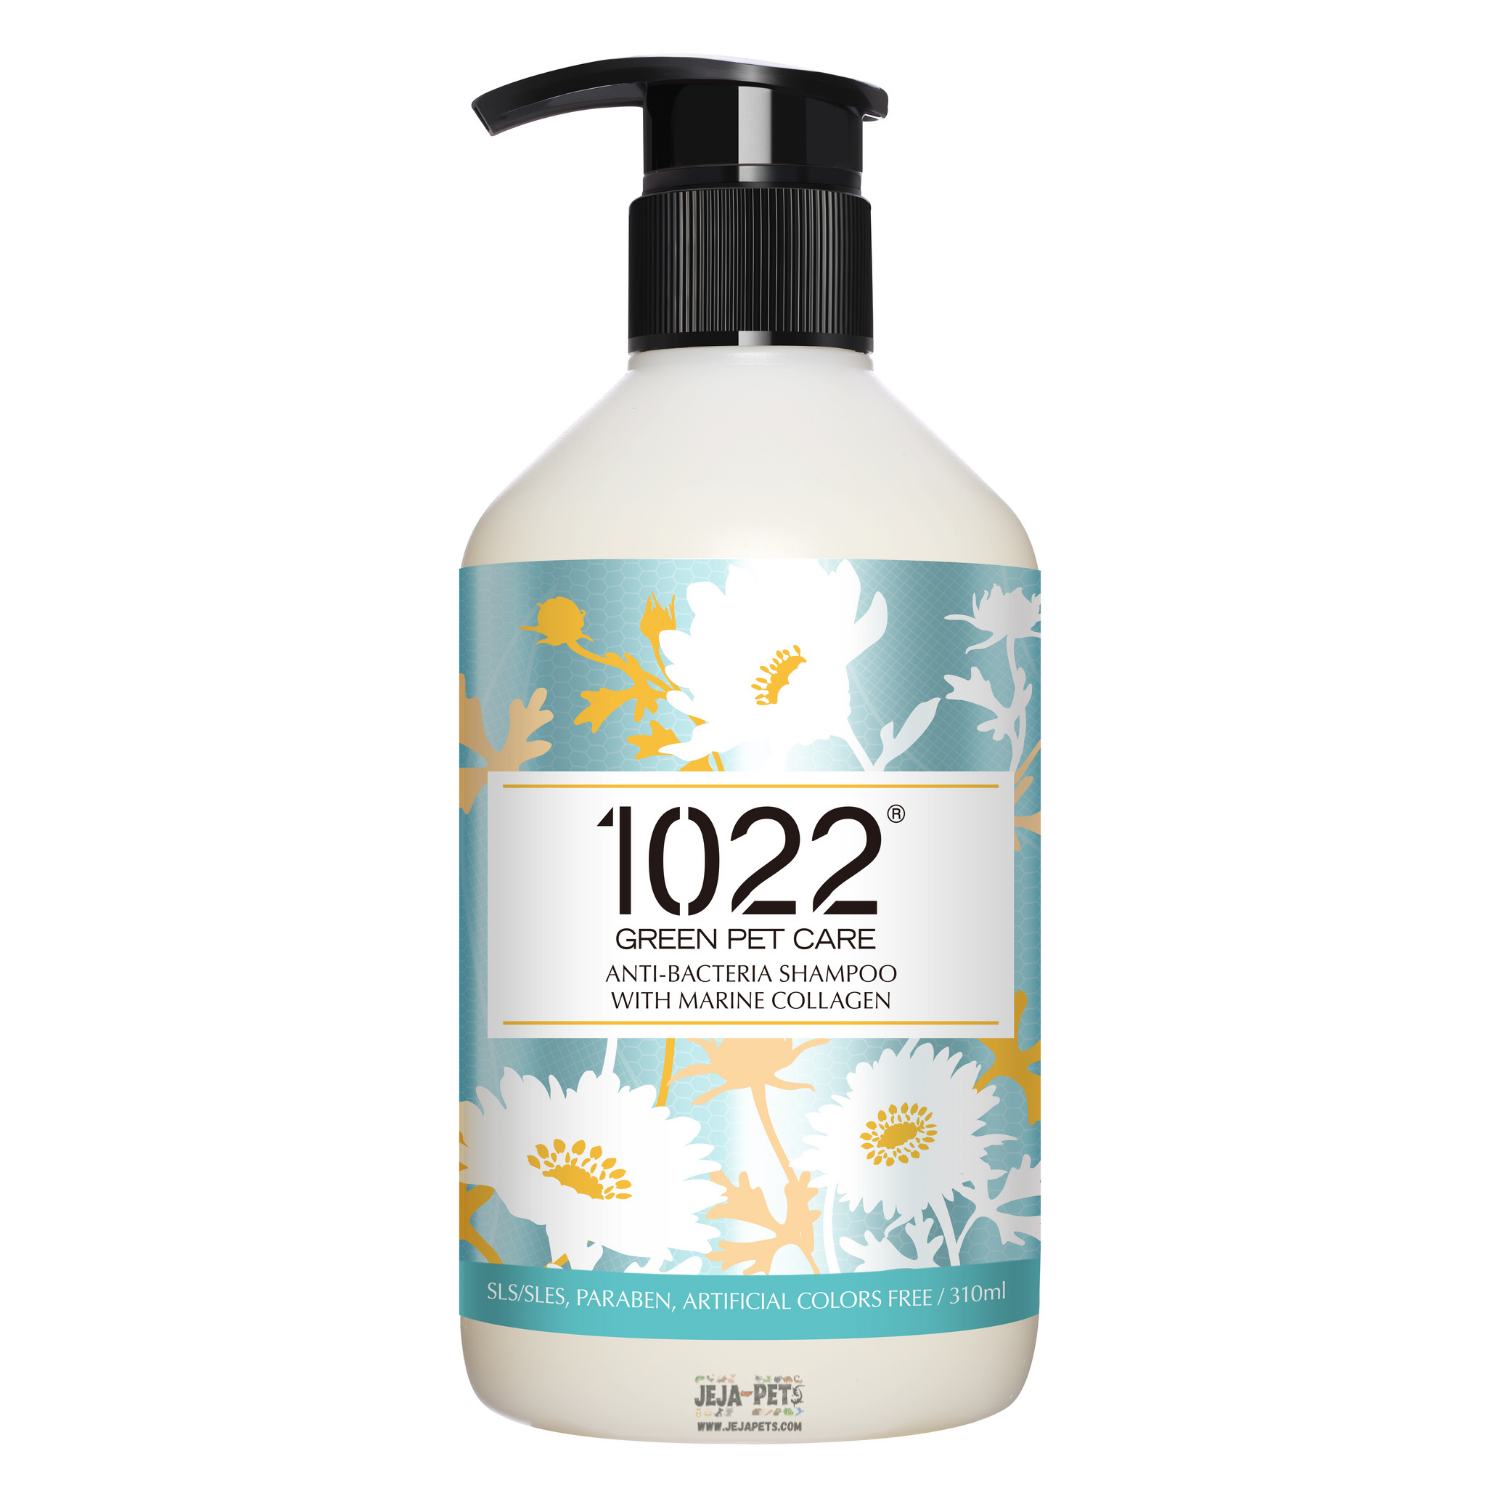 1022 Green Pet Care Anti-Bacteria Shampoo for Dogs - 310ml / 4L